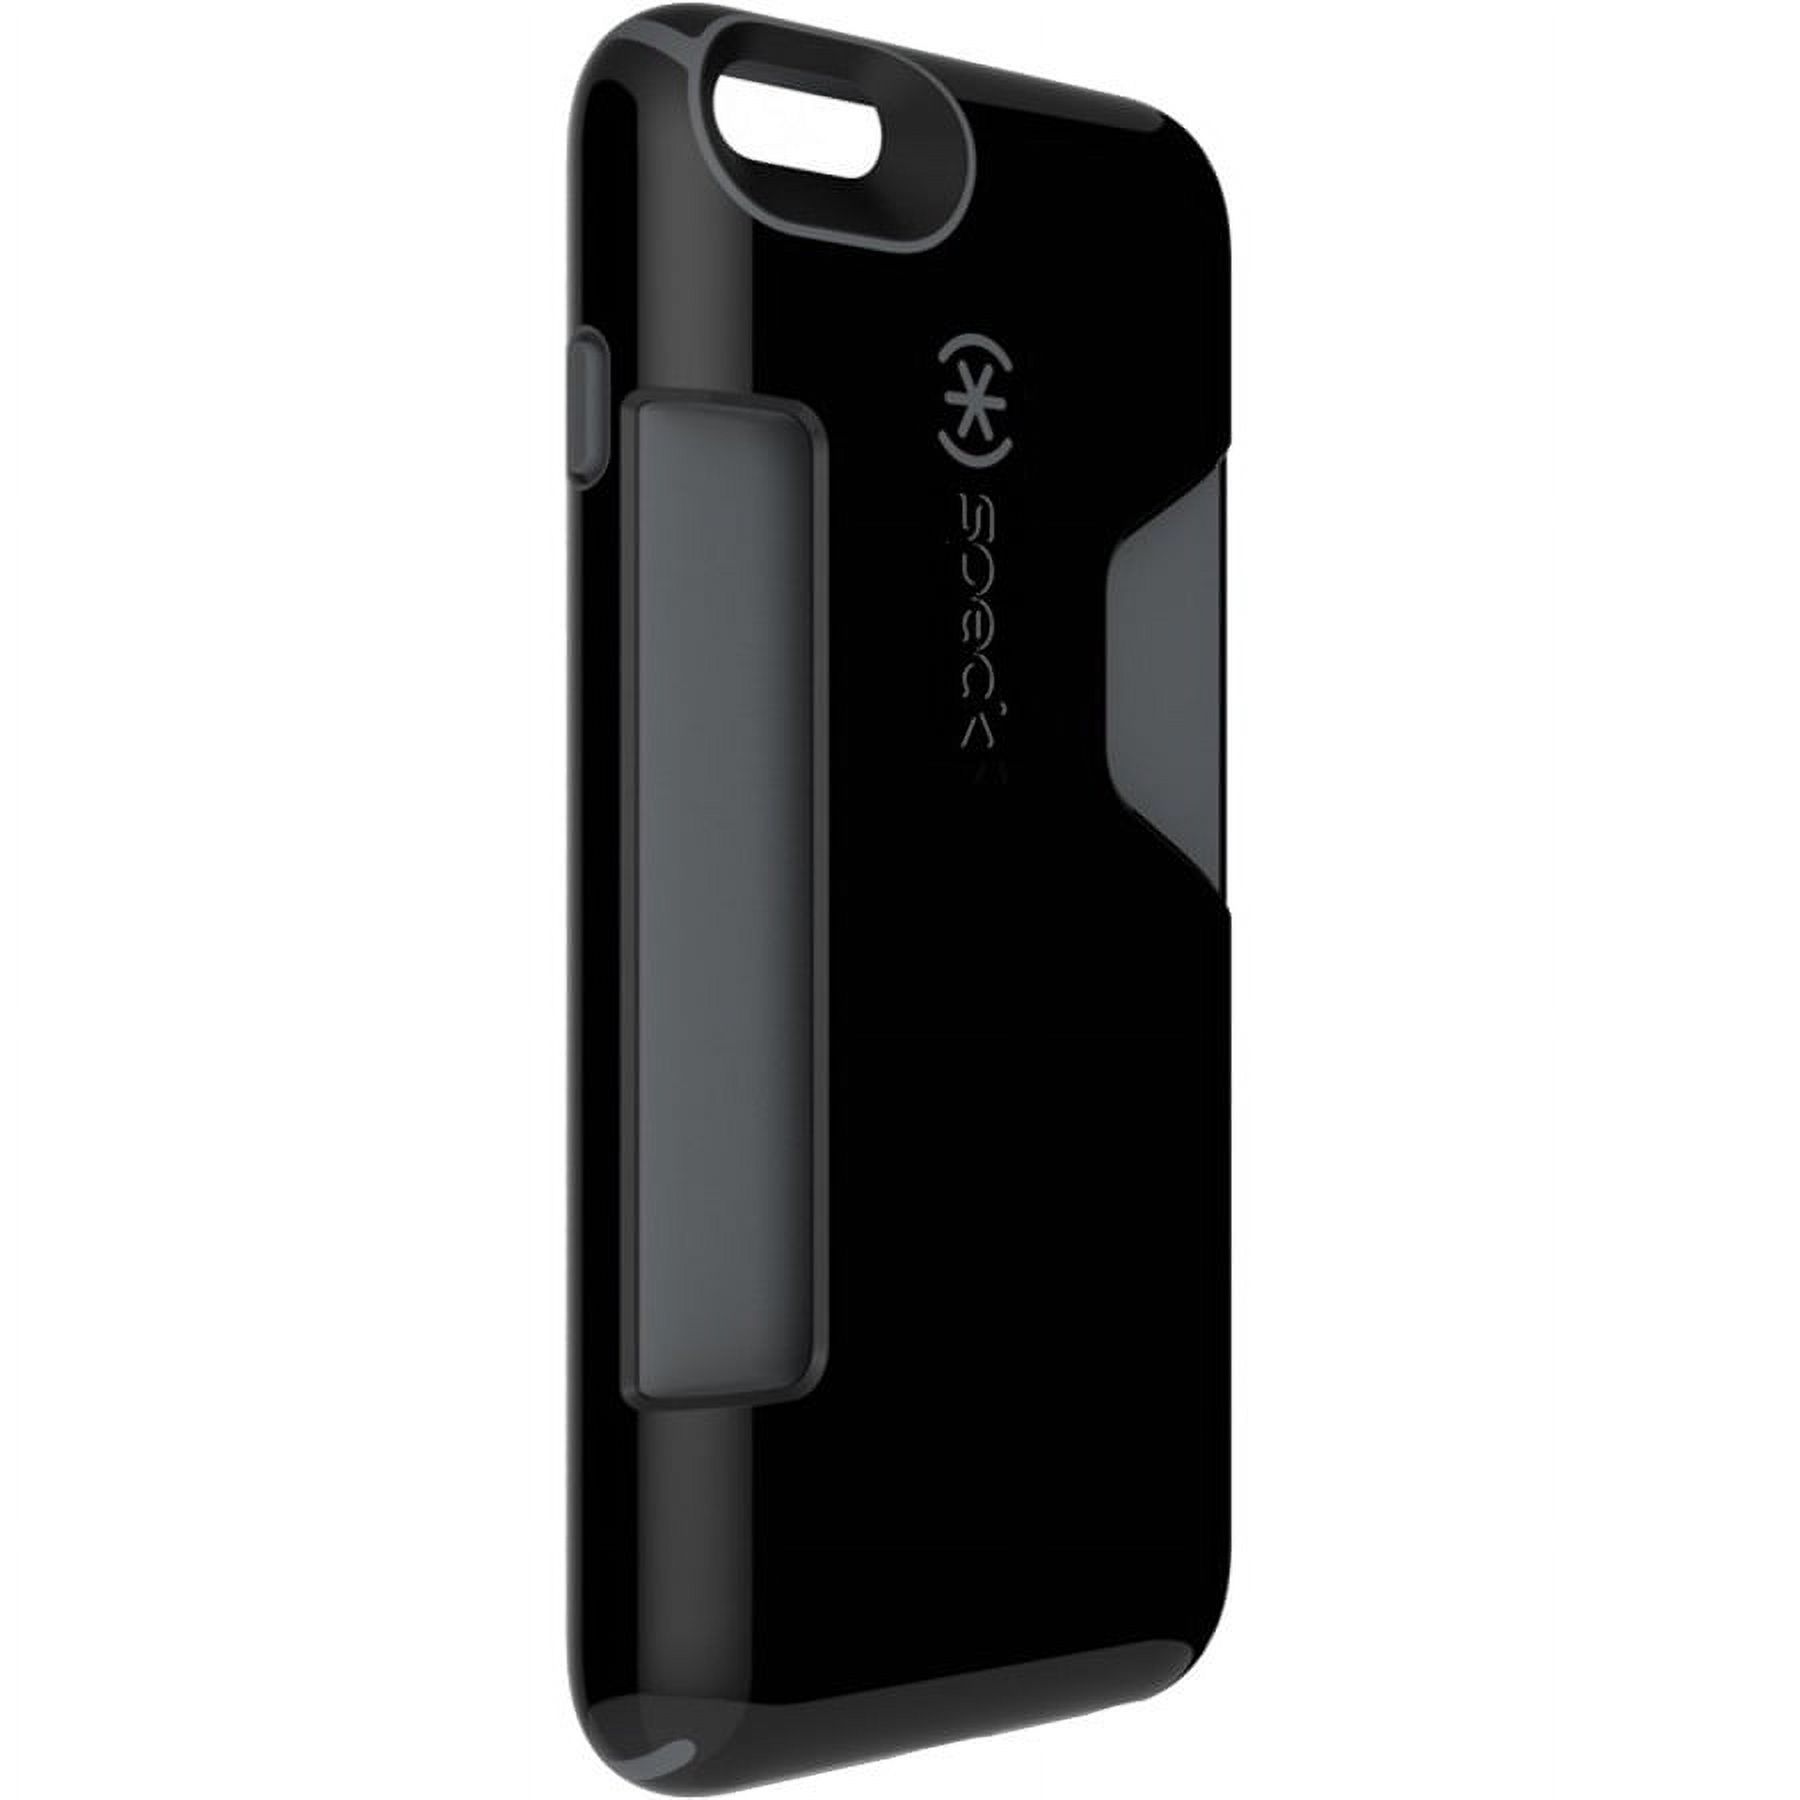 Speck CandyShell Card iPhone 6 Plus Case - image 2 of 2